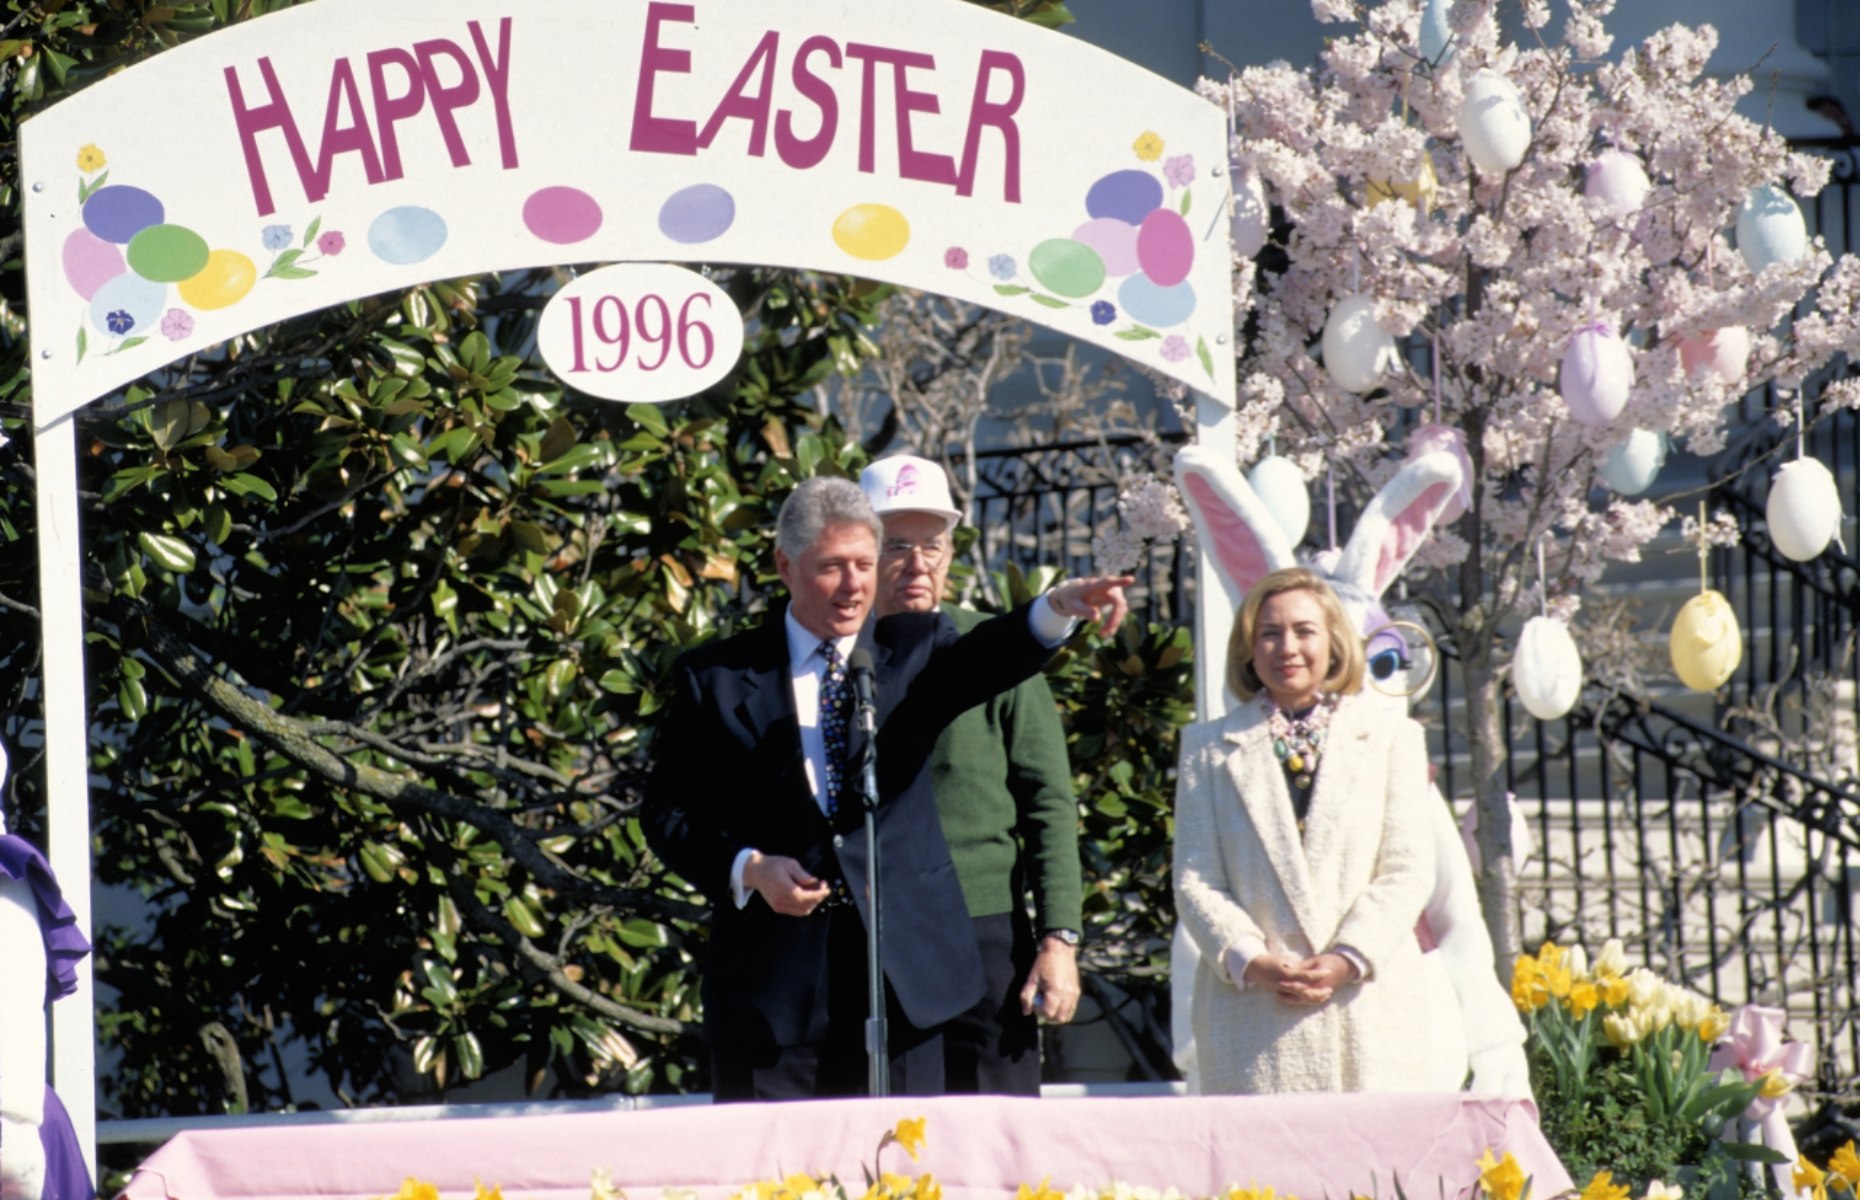 1996, President Bill Clinton and First Lady Hillary Clinton welcome everybody to the annual Easter Egg Roll at the White House (Image: Mark Reinstein/Shutterstock)